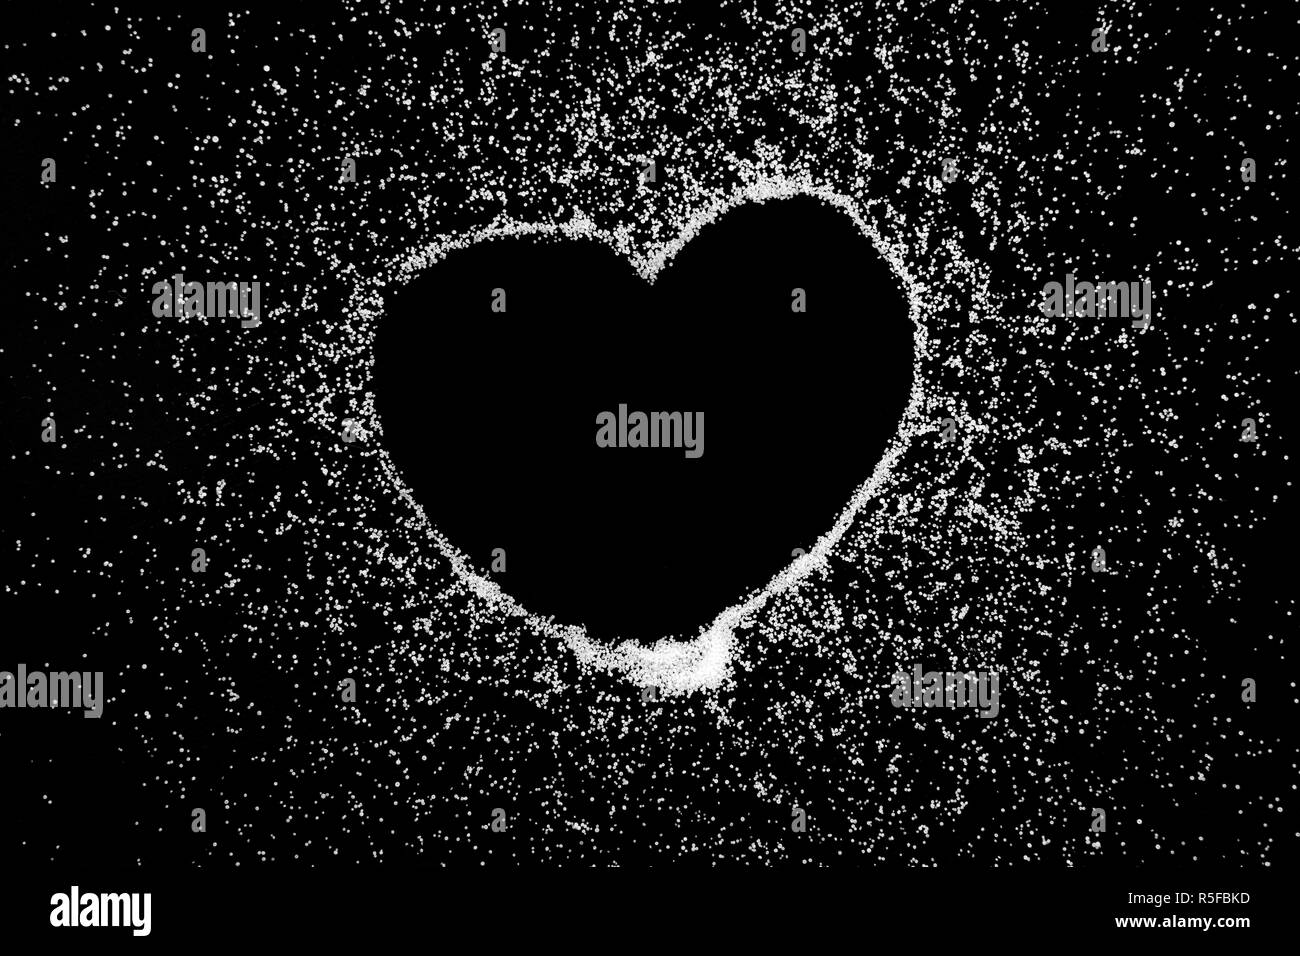 Empty love heart symbol drawing by finger on white salt powder on black background. Romantic St. Valentines Day holidays concept with place for text. Copy space. Stock Photo